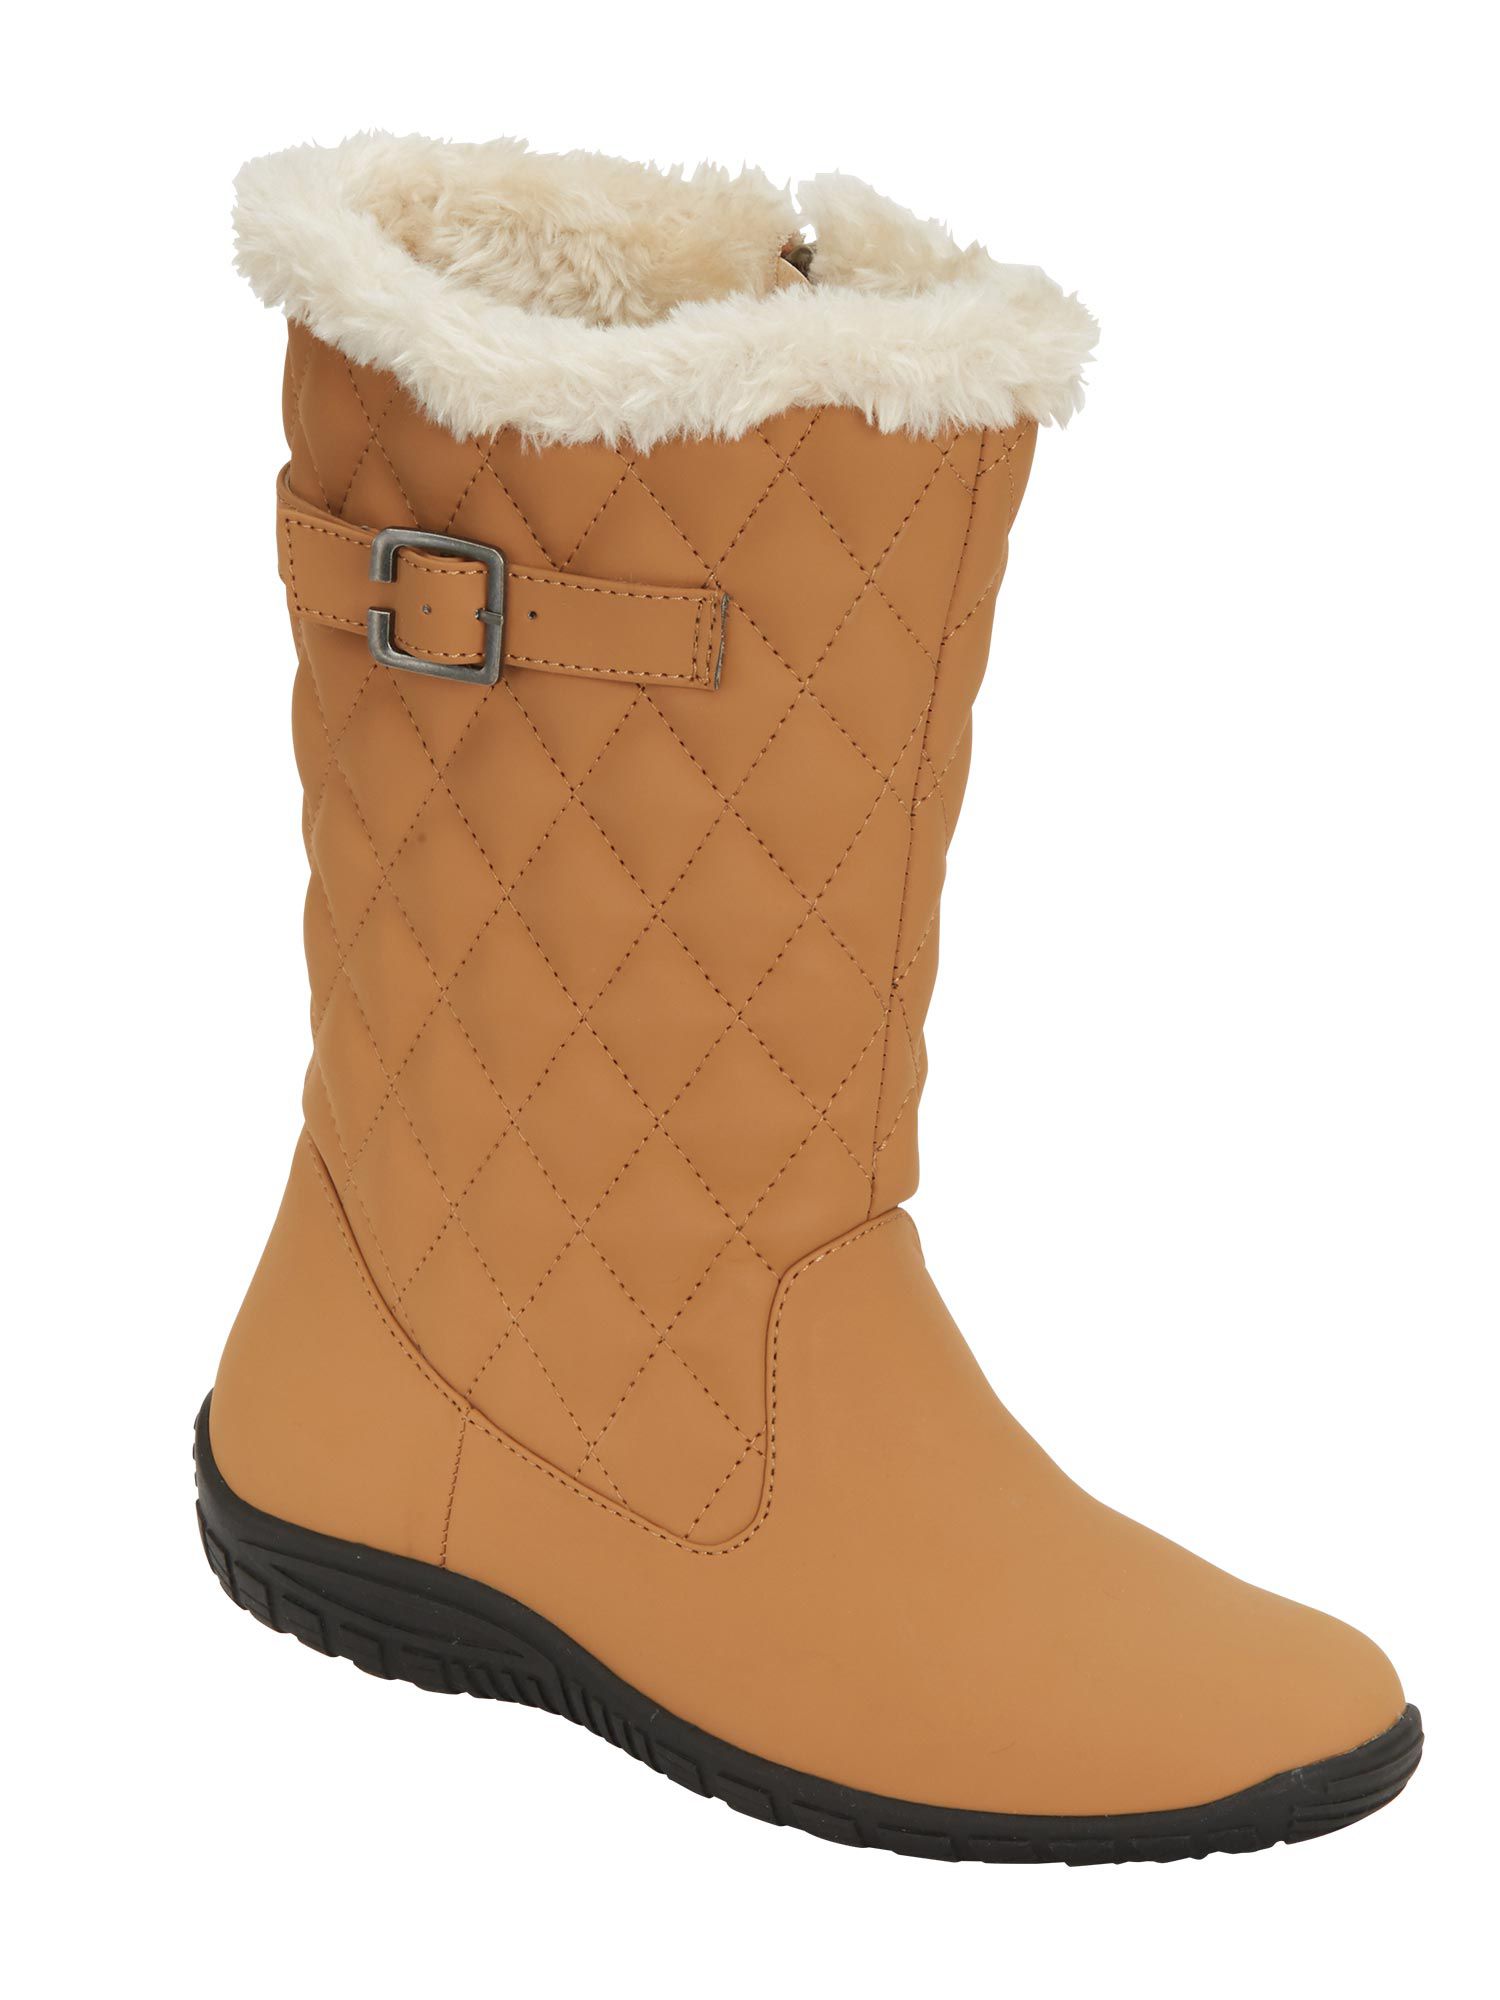 Details about   Womens Ladies Fashion Quilted Rabbit  Fur Trim Knee High Comfy Boots Shoes BGHE 